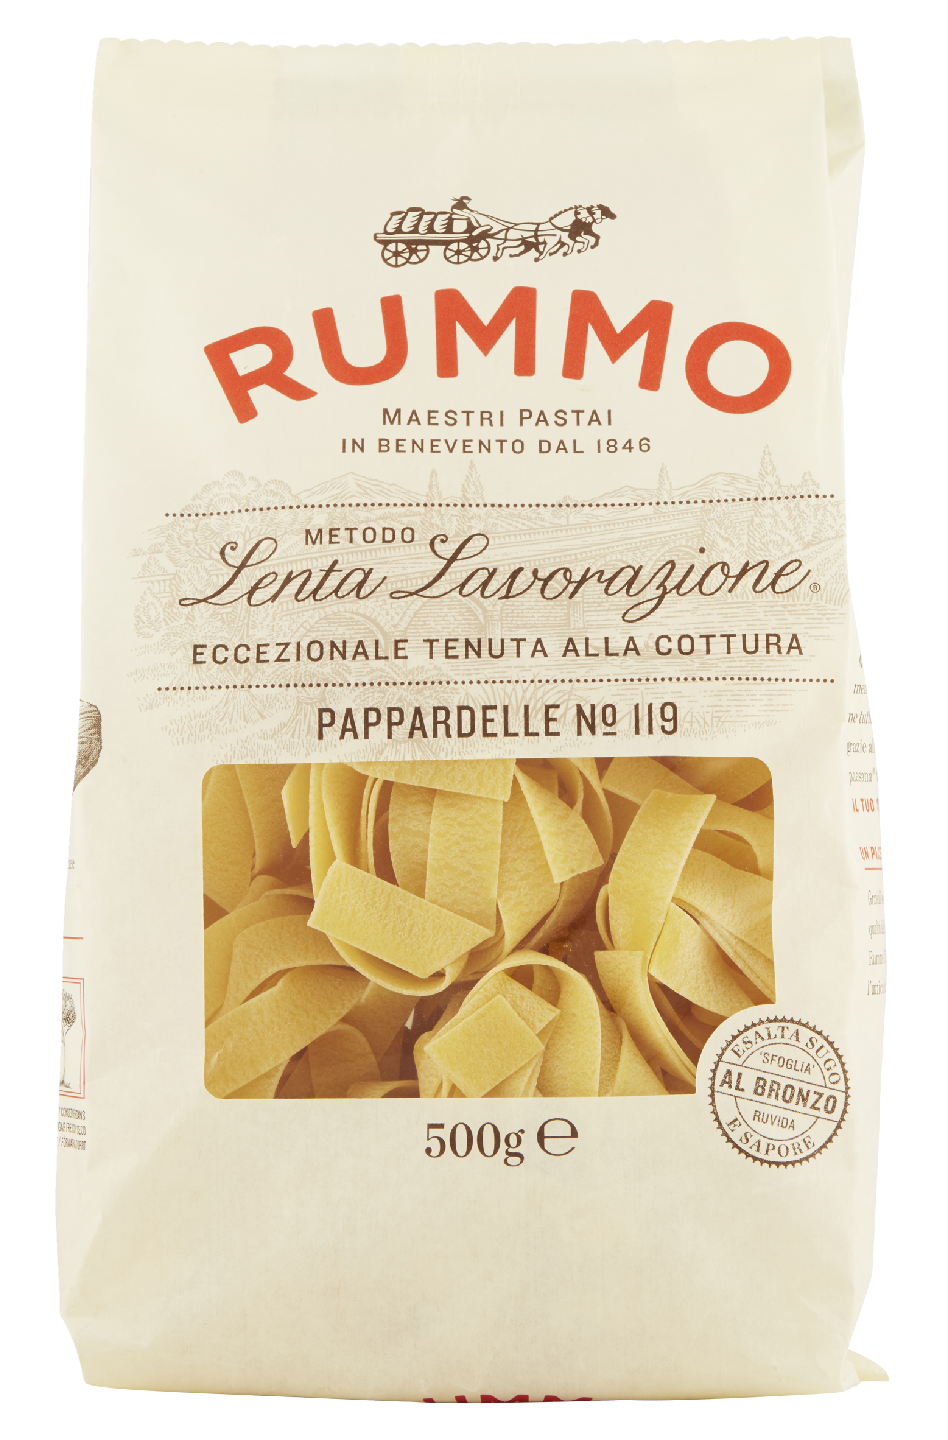 Rummo Pappardelle No119 pasta 500g